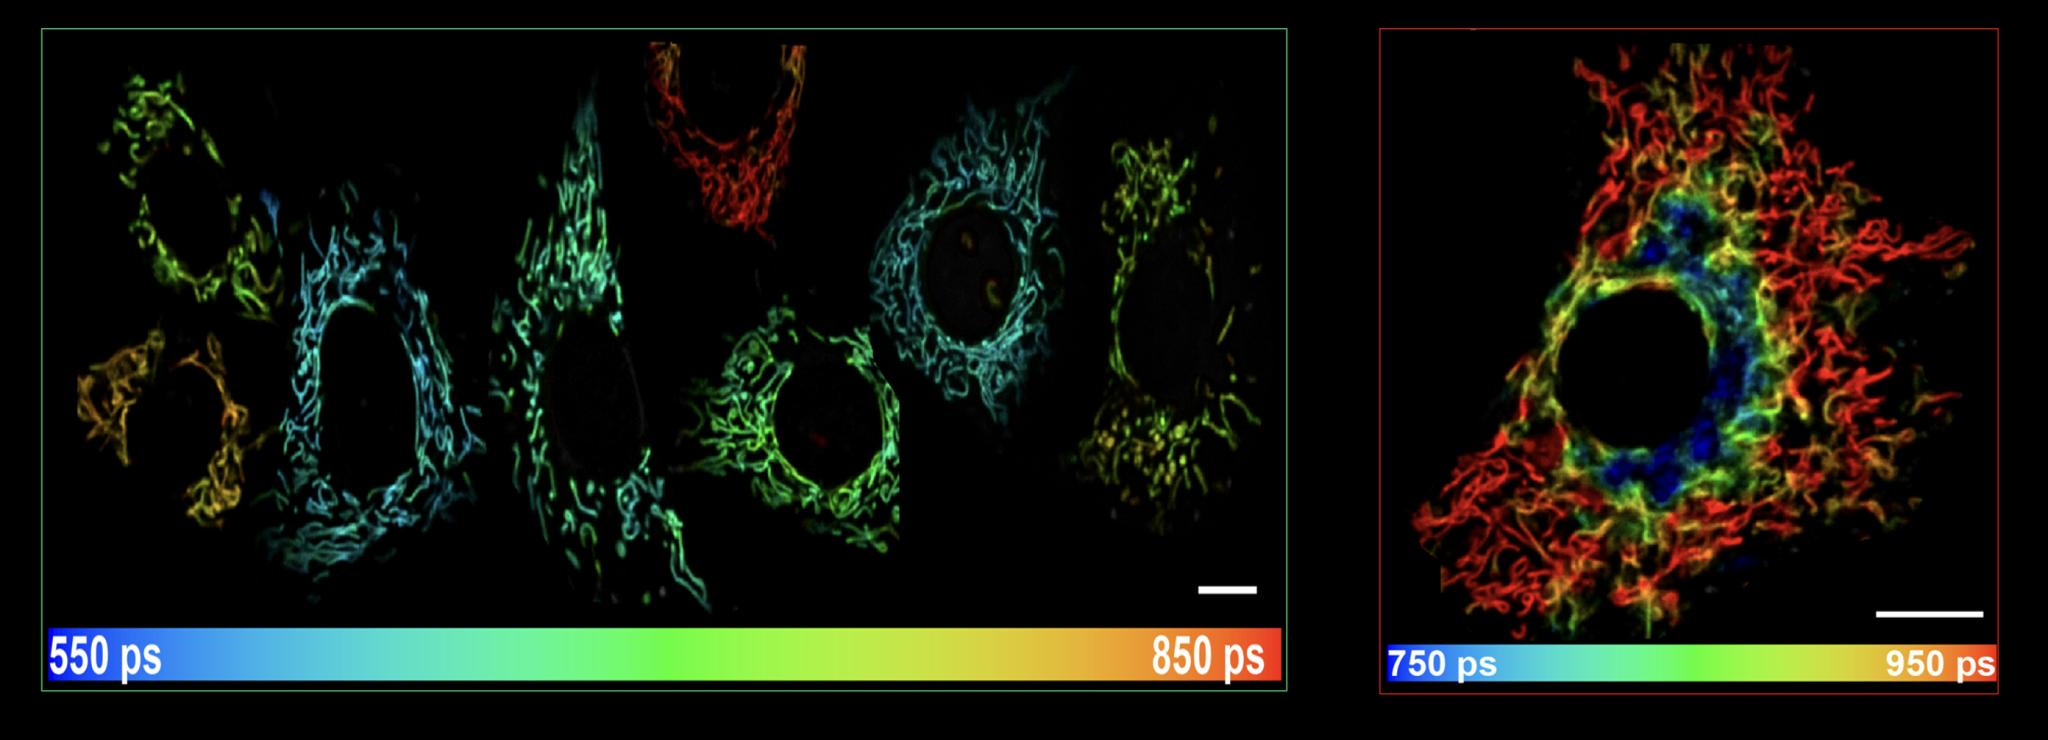 Varying fluorescence lifetimes of Mitrotor-1 reveal differences in inner mitochondrial membrane fluidity. Image Credit: Gaurav Singh